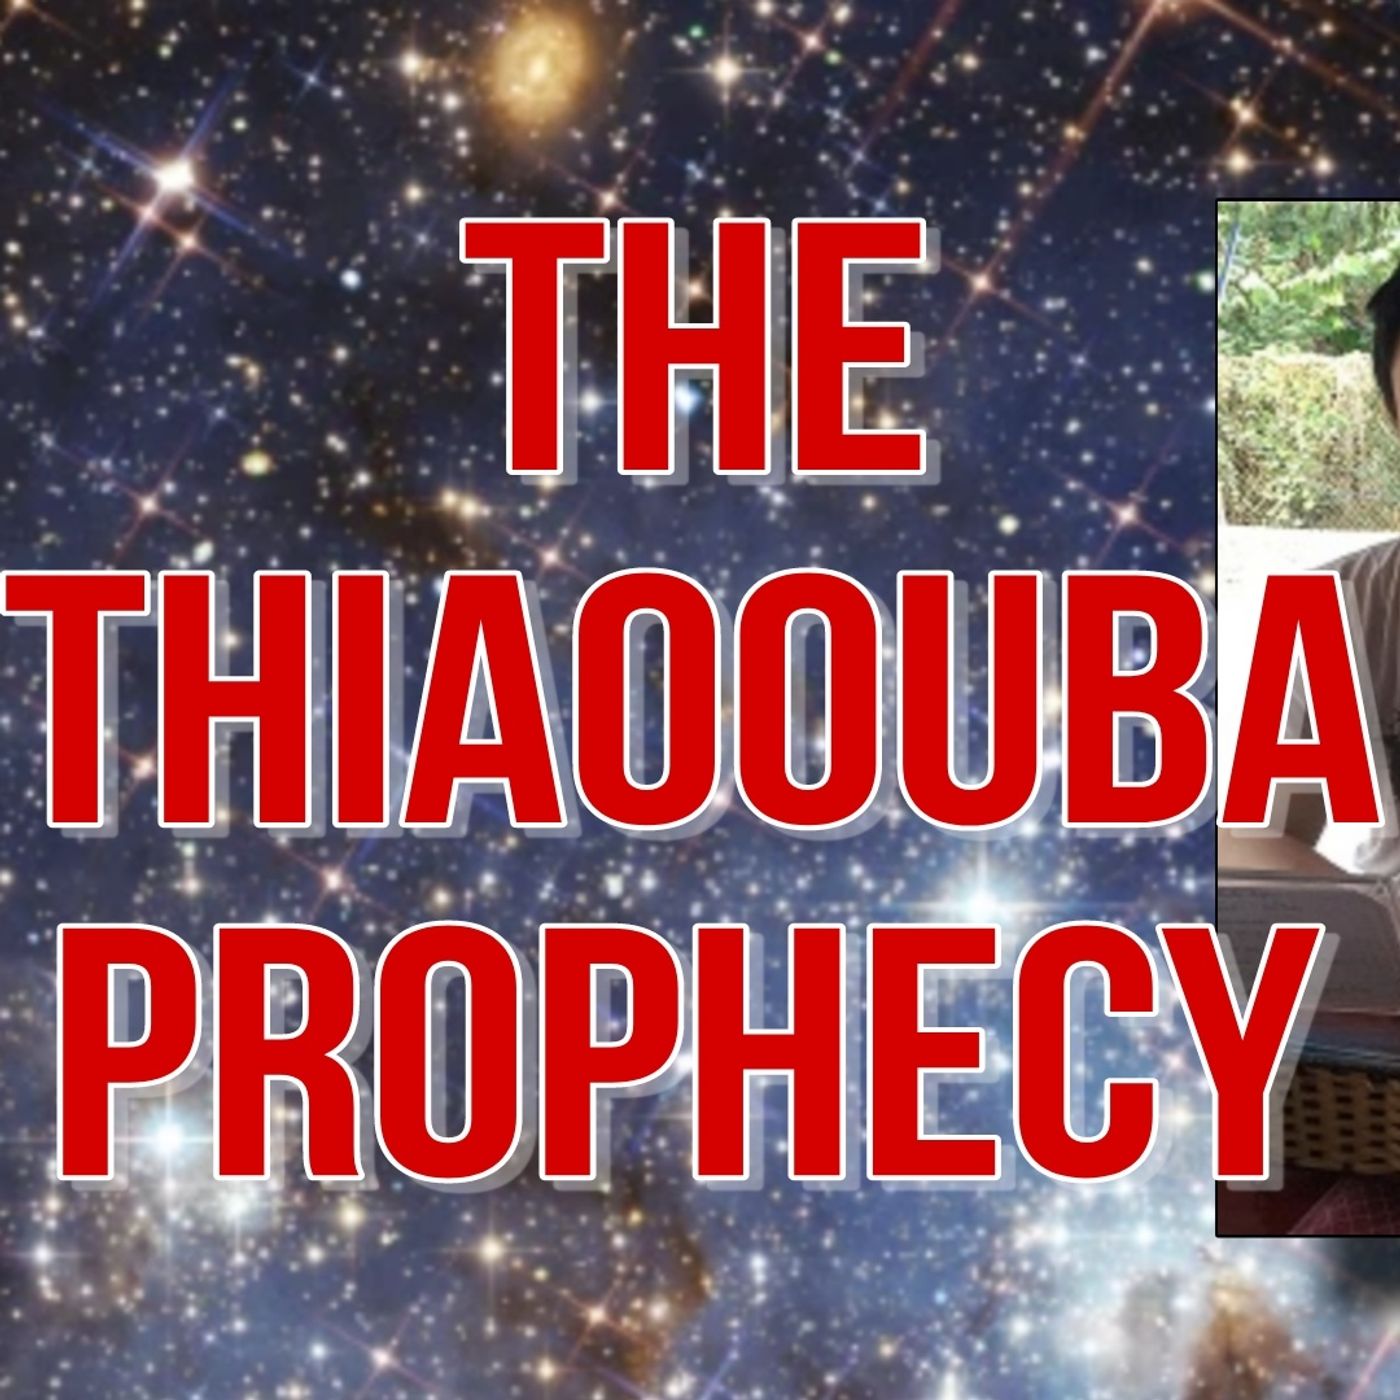 Samuel Chong and the Thiaoouba Prophecy